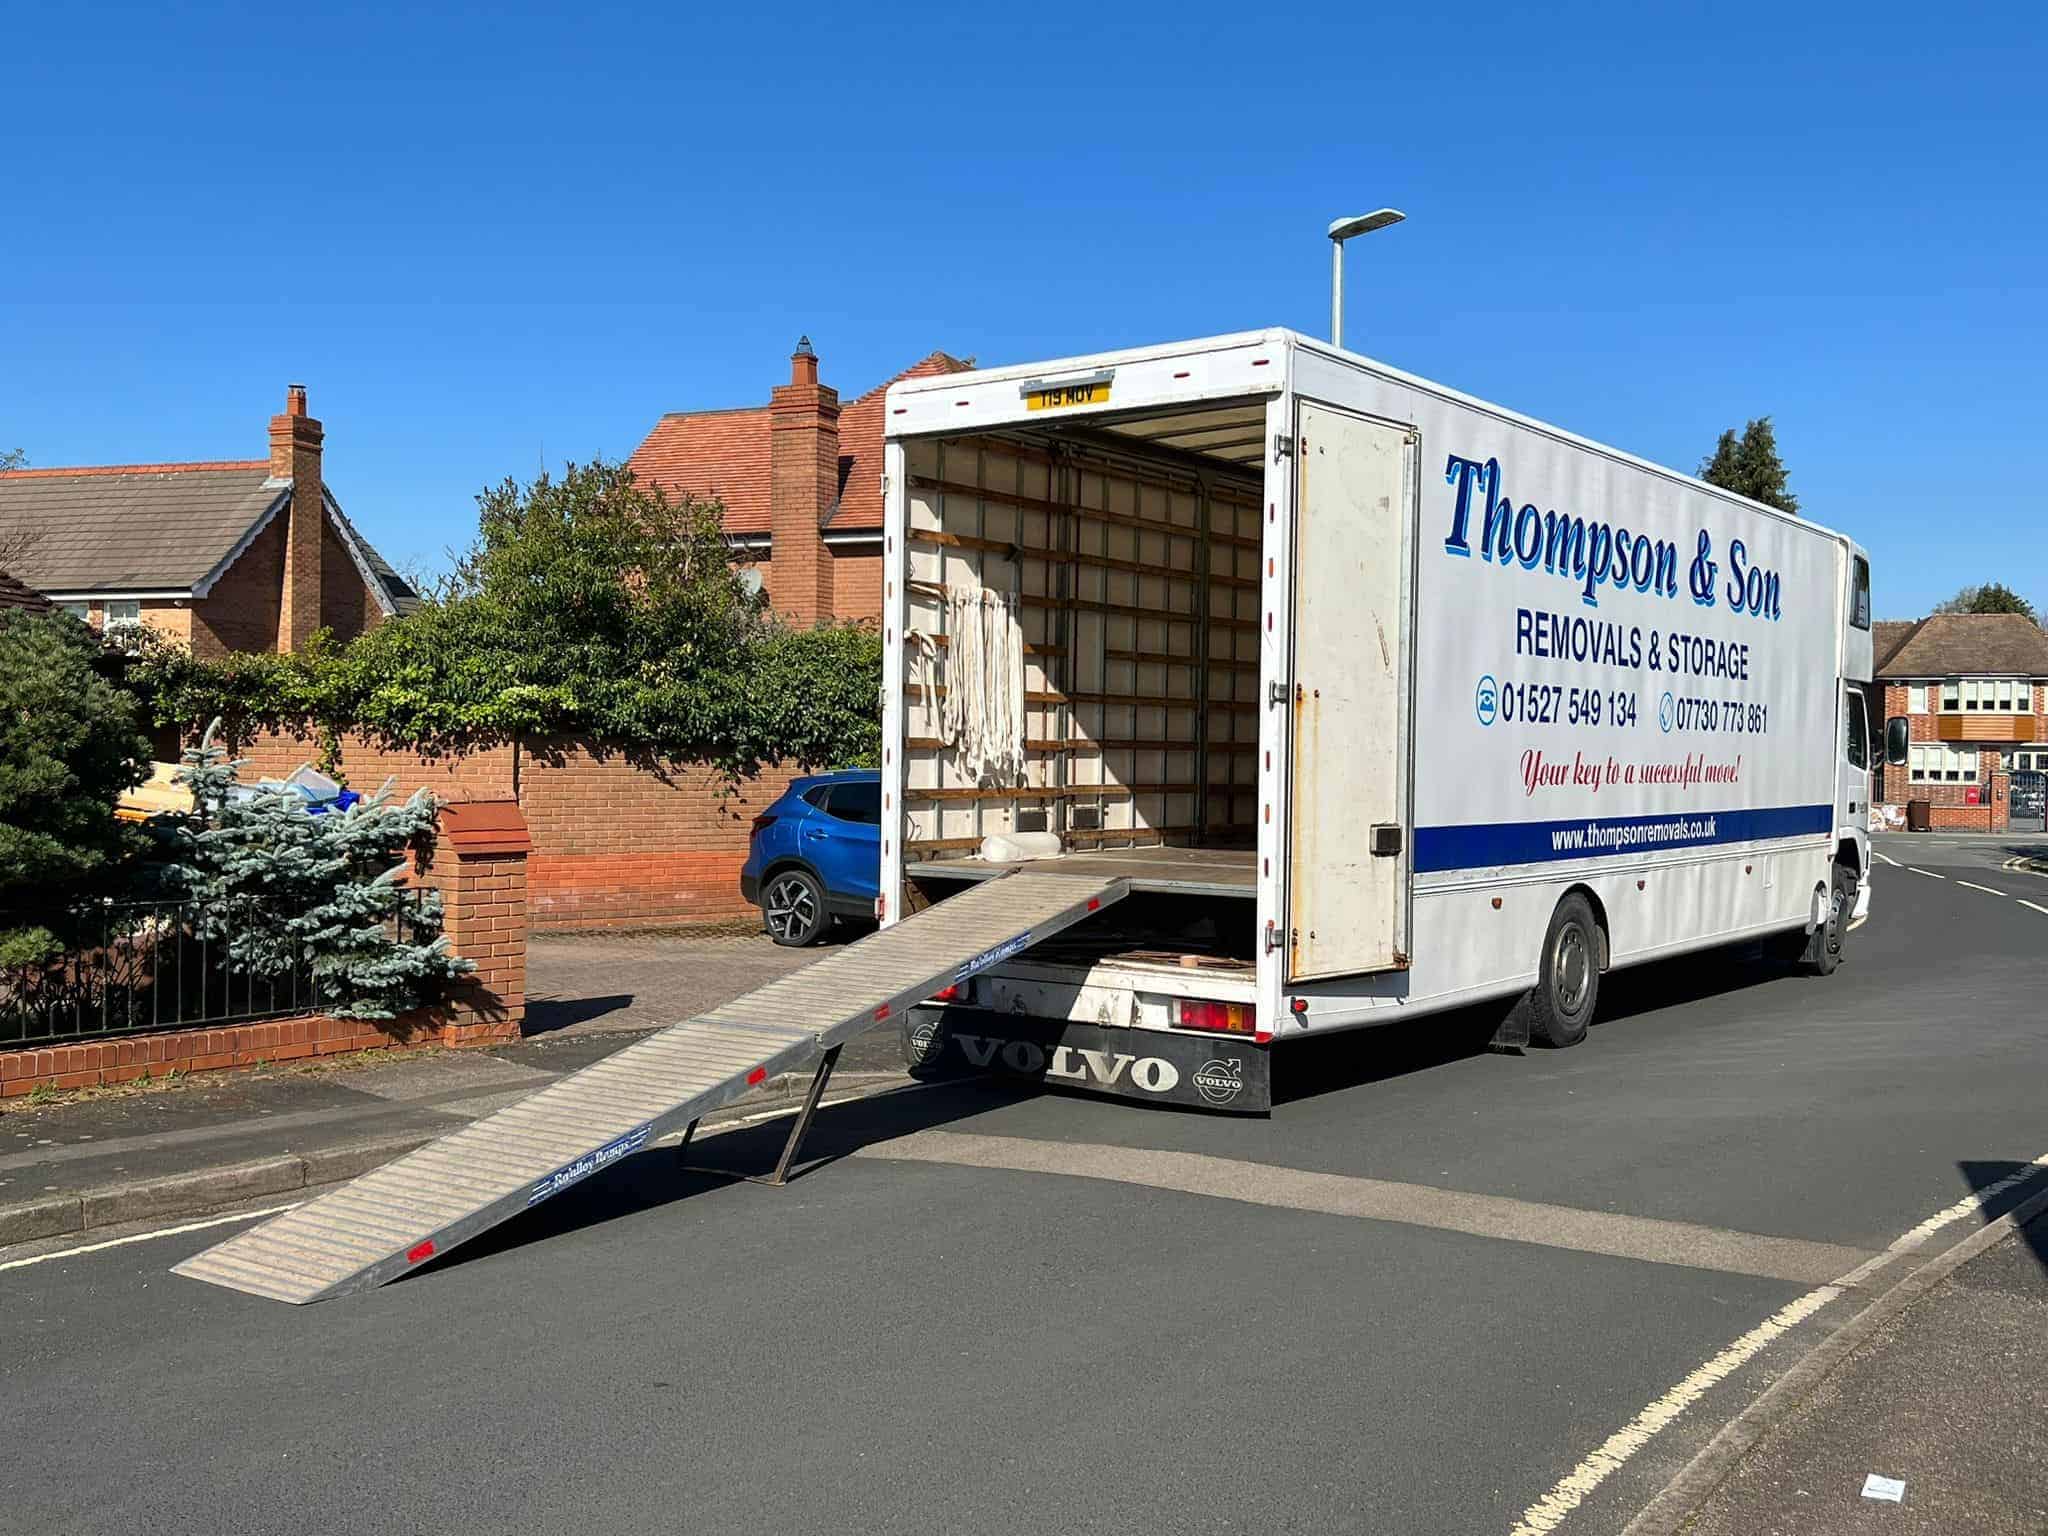 Removal Of Old Pianos - Birmingham Removals